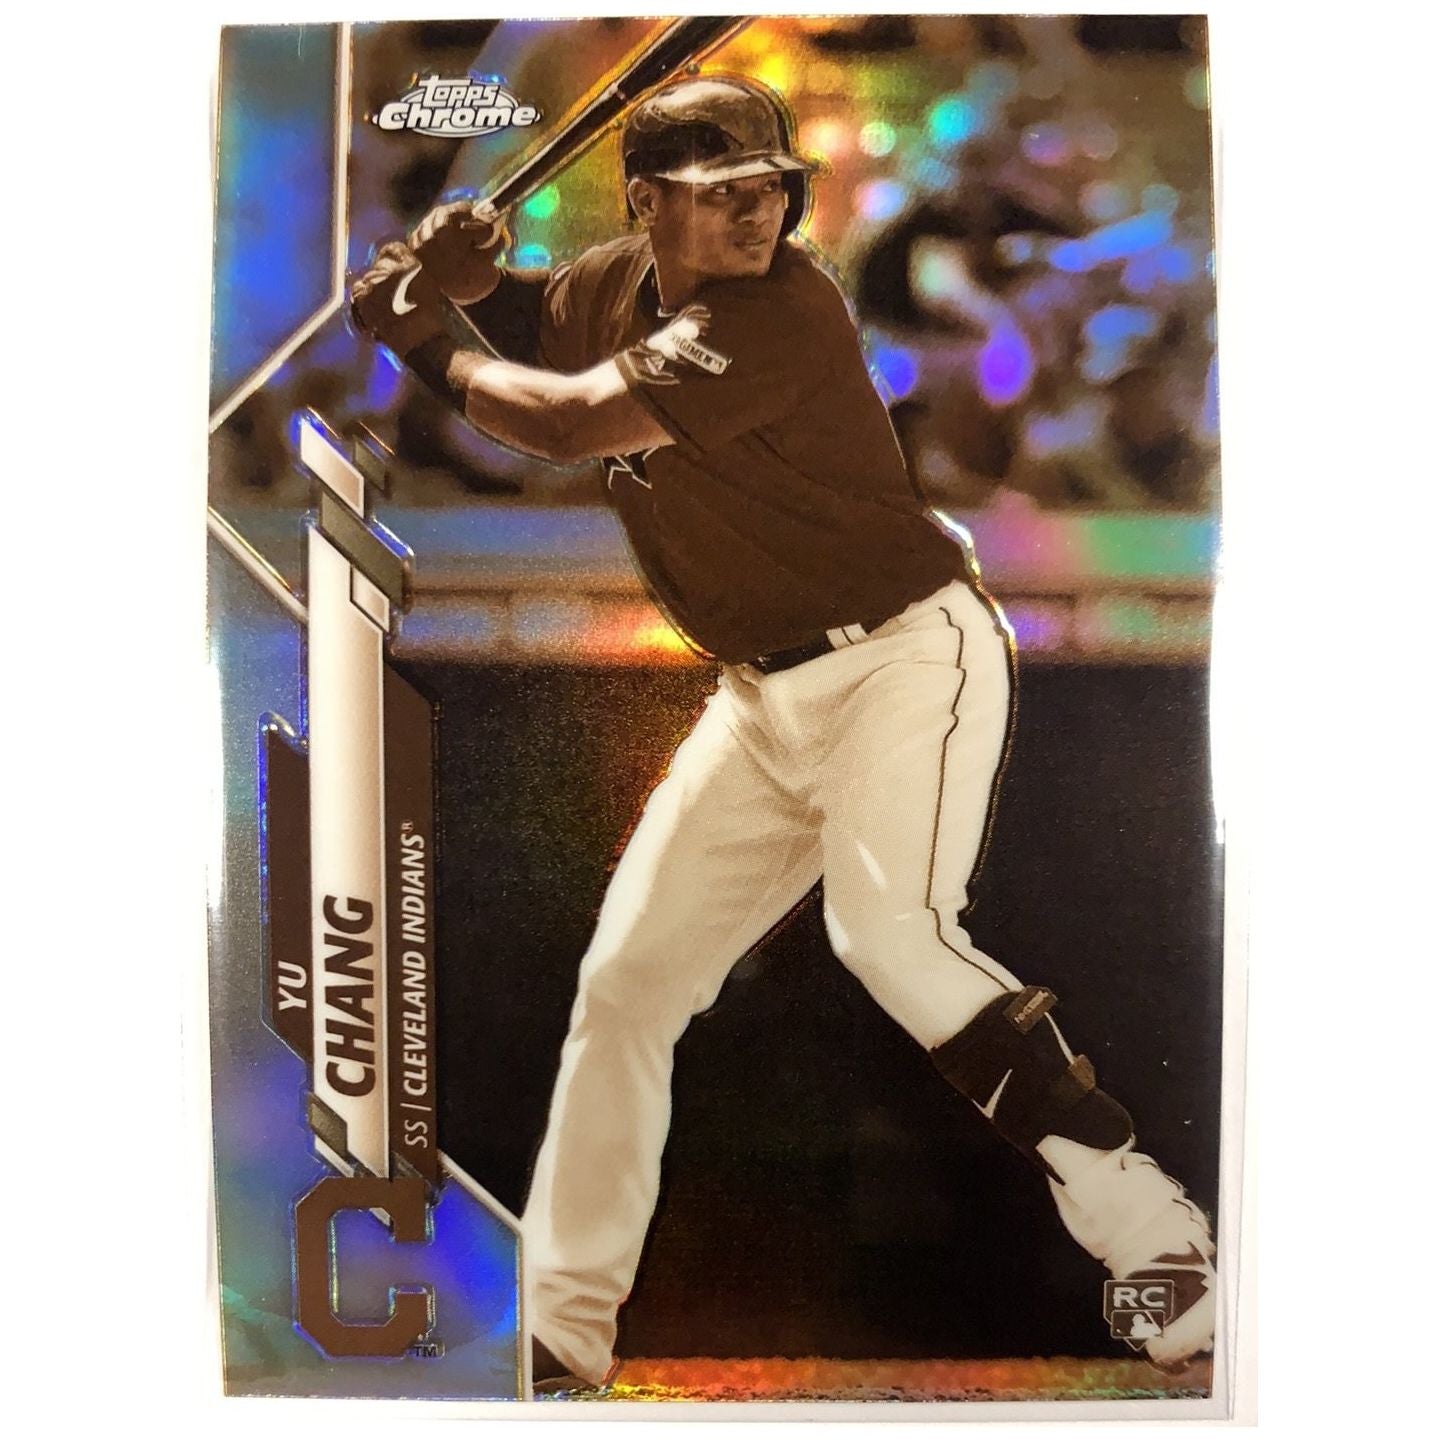  2020 Topps Chrome Yu Chang RC Sepia Refractor  Local Legends Cards & Collectibles